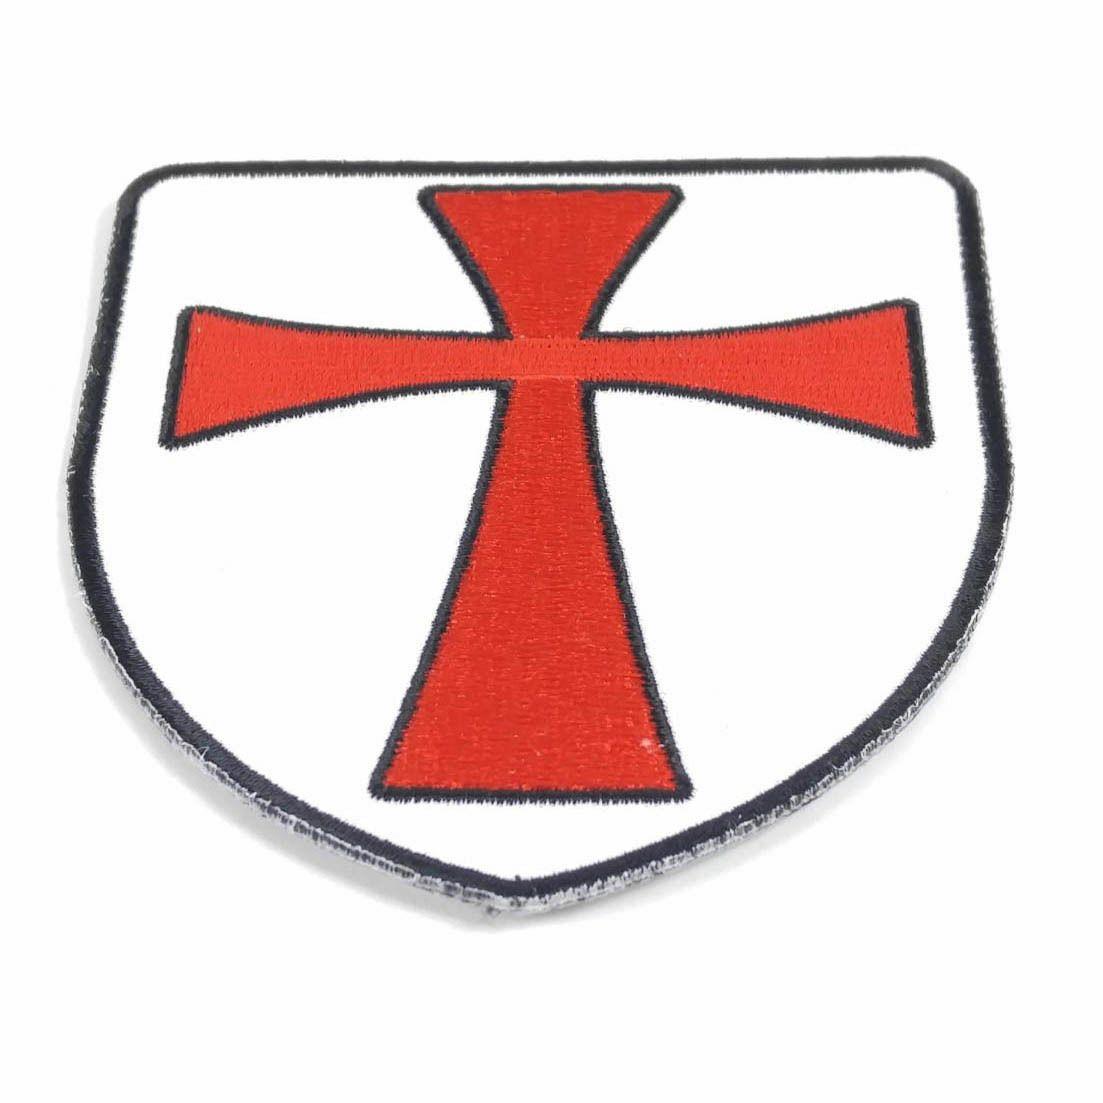 Red Cross and Shield Logo - Embroidered Knights Templar Shield Red Cross Sew or Iron on Patch ...